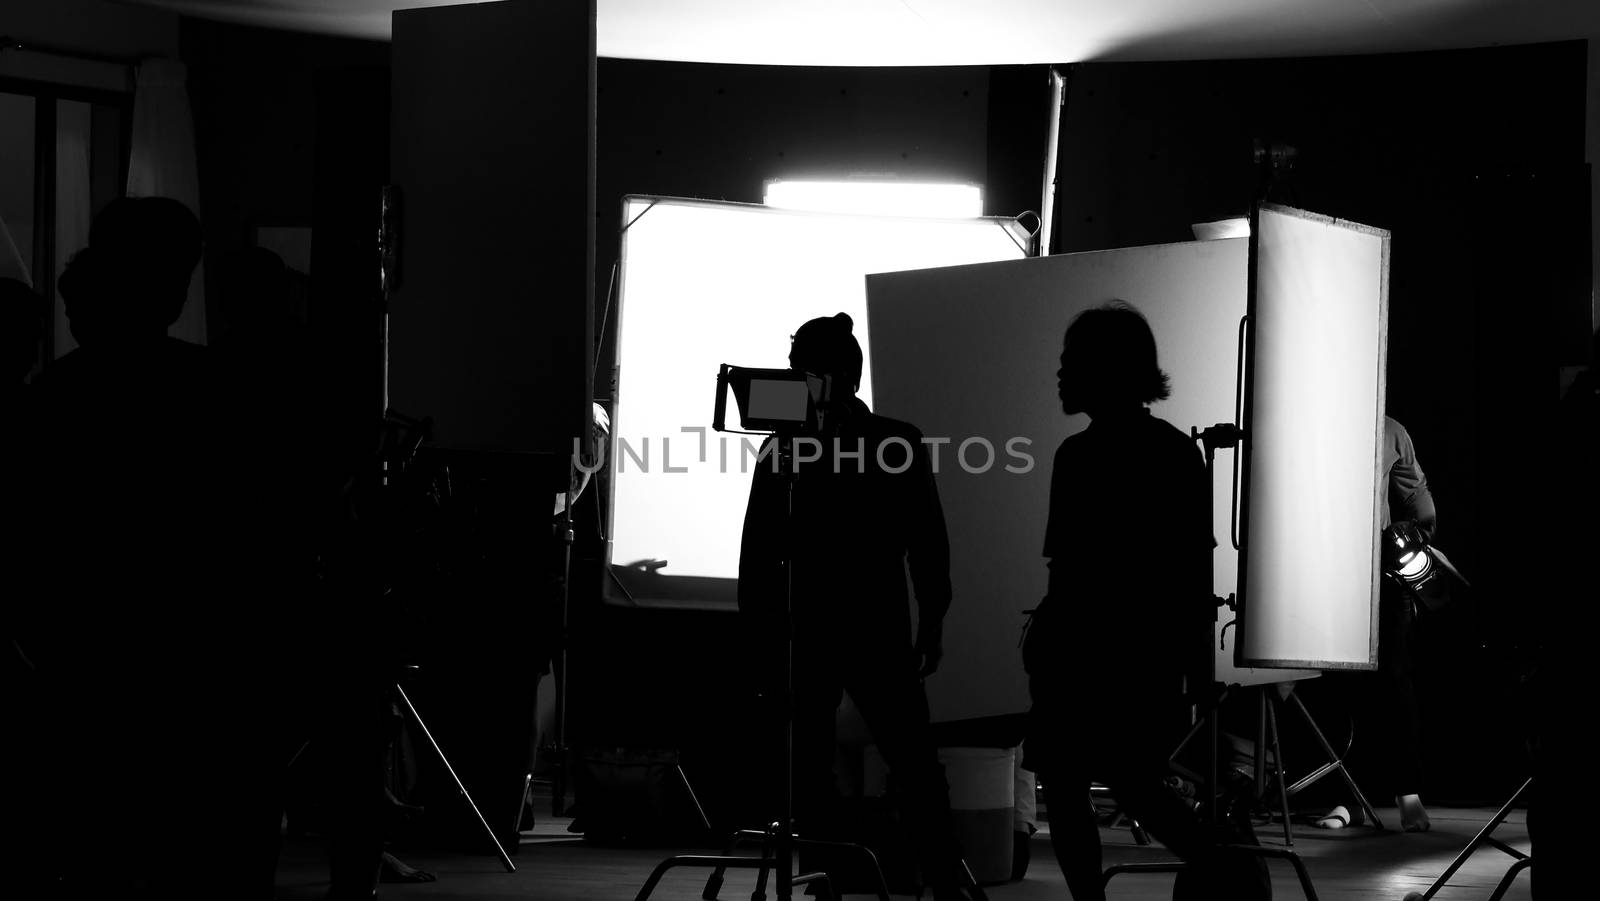 Shooting studio behind the scenes in silhouette images by gnepphoto